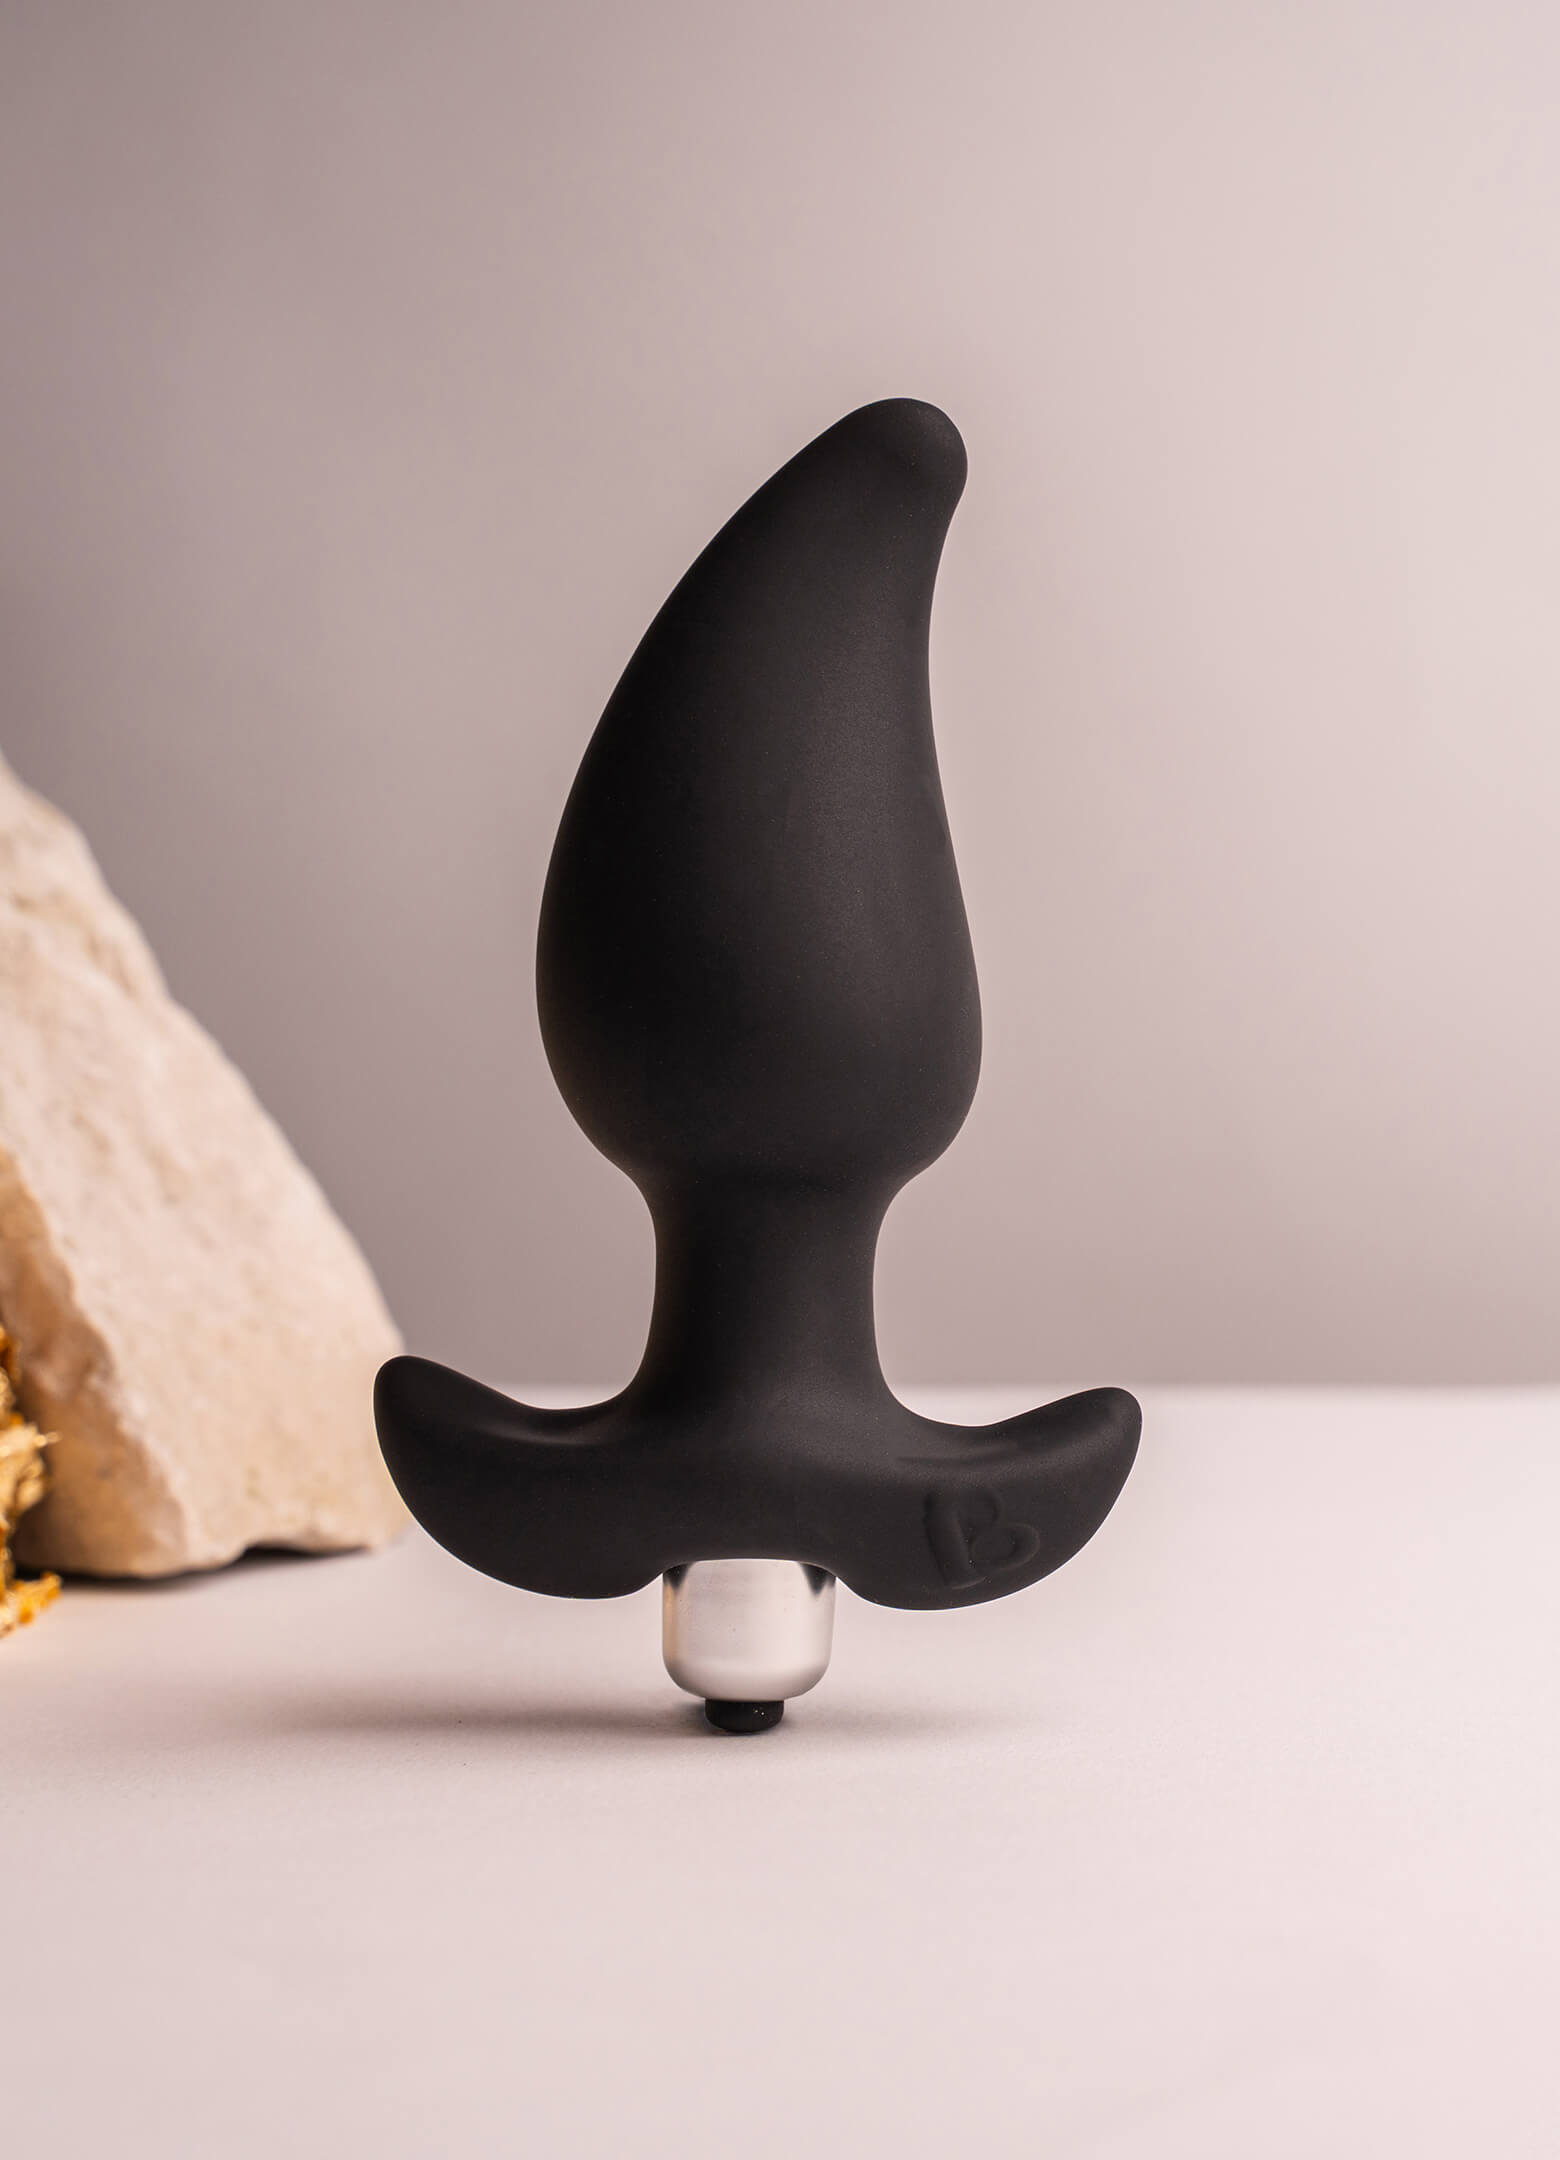 Black pear shaped butt plug with a flared based housing a removable bullet vibrator.